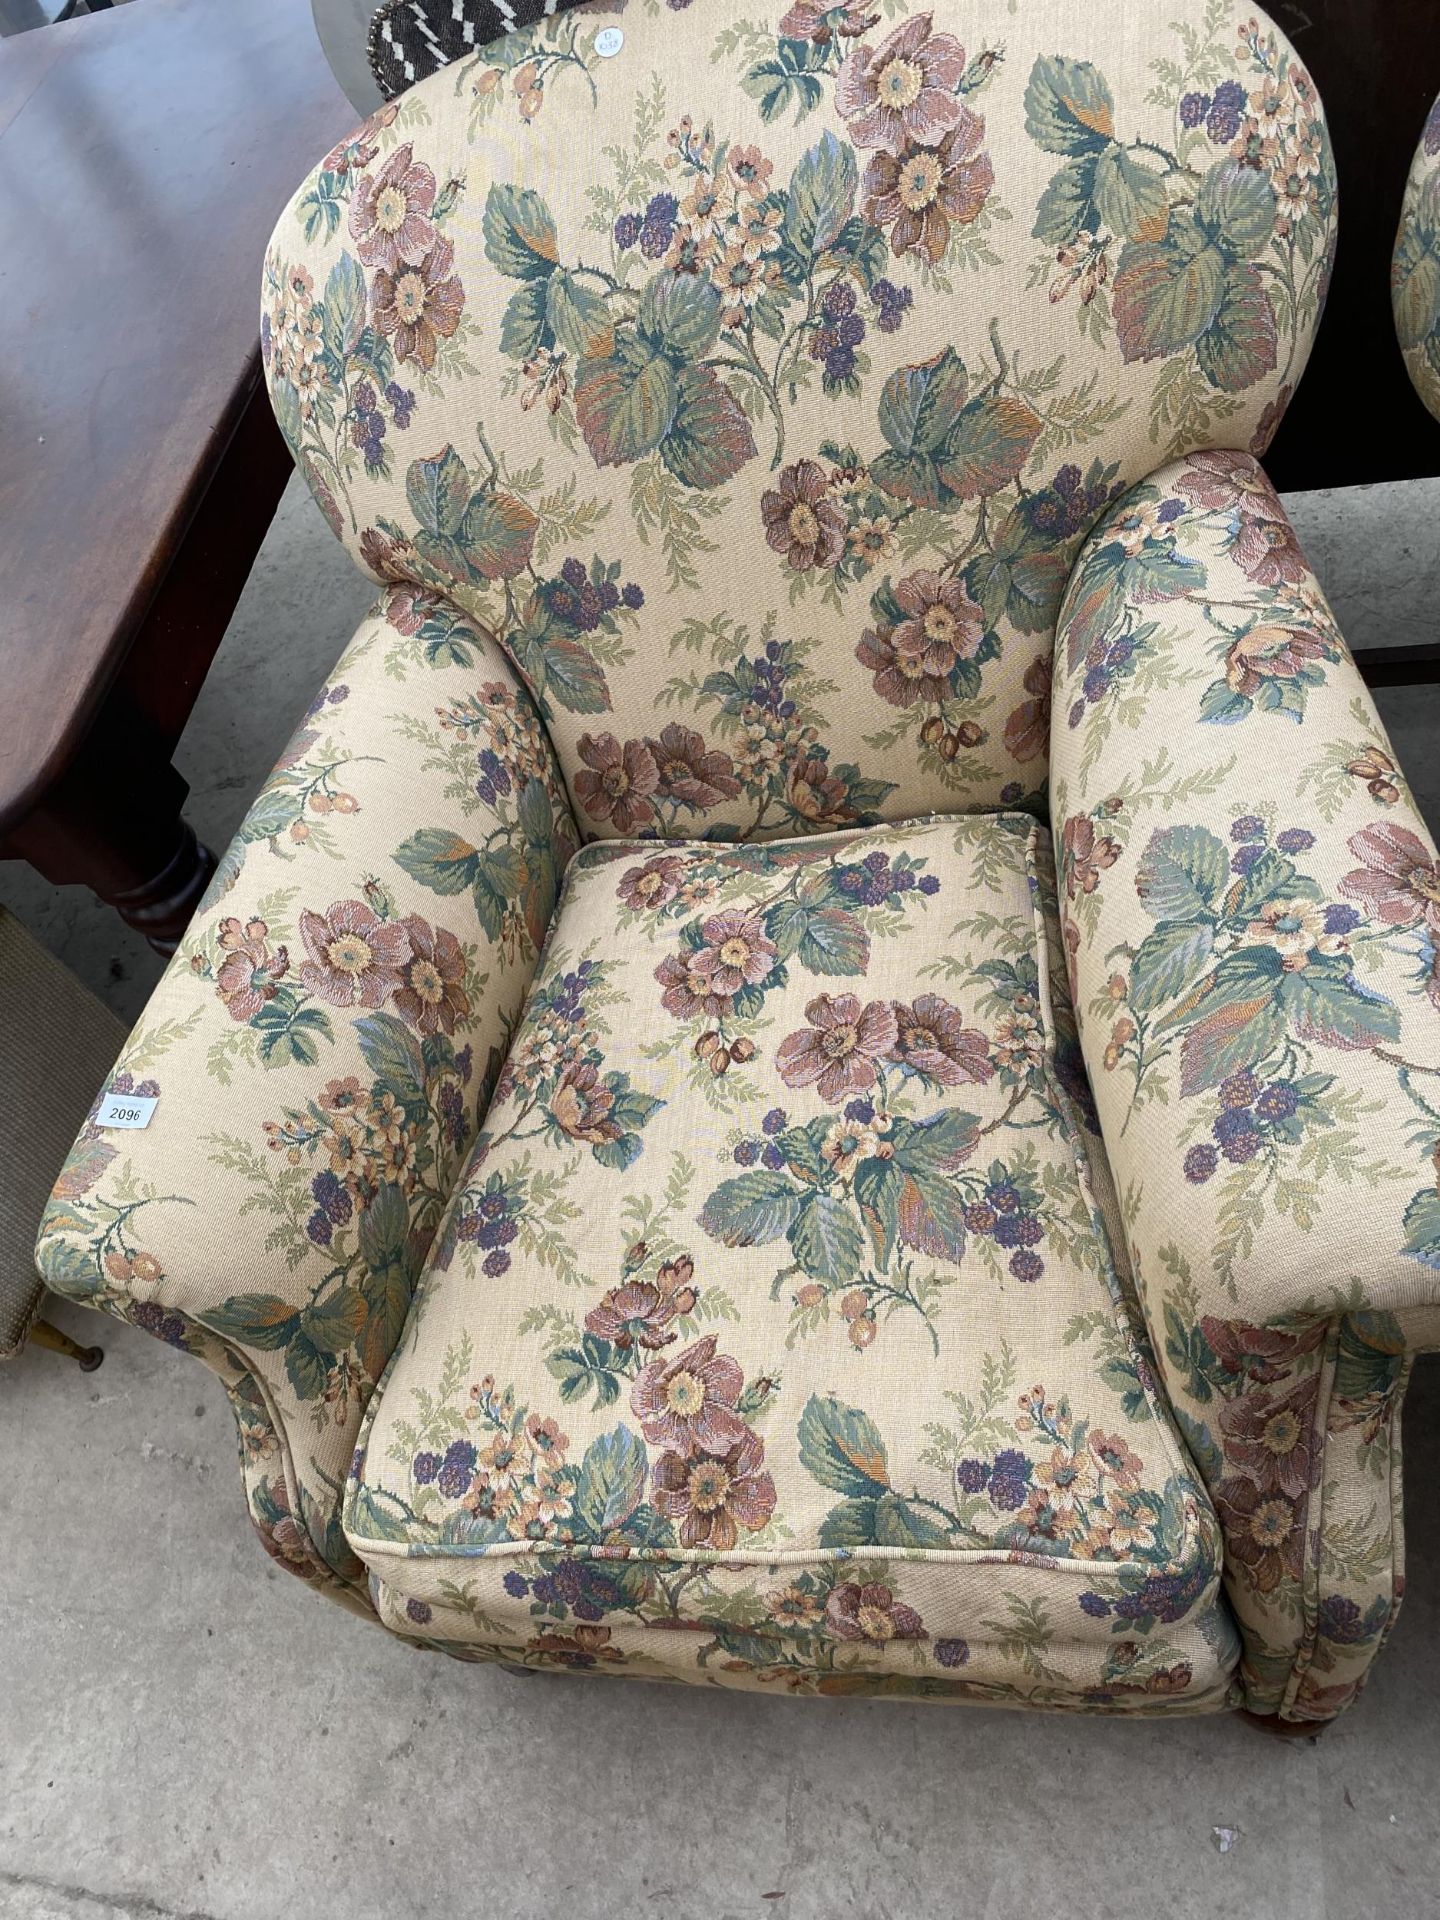 A PAIR OF EARLY 20TH CENTURY SPRUNG AND UPHOLSTERED EASY CHAIRS ON BUN FEET WITH A SPARE LOOSE COVER - Image 4 of 4